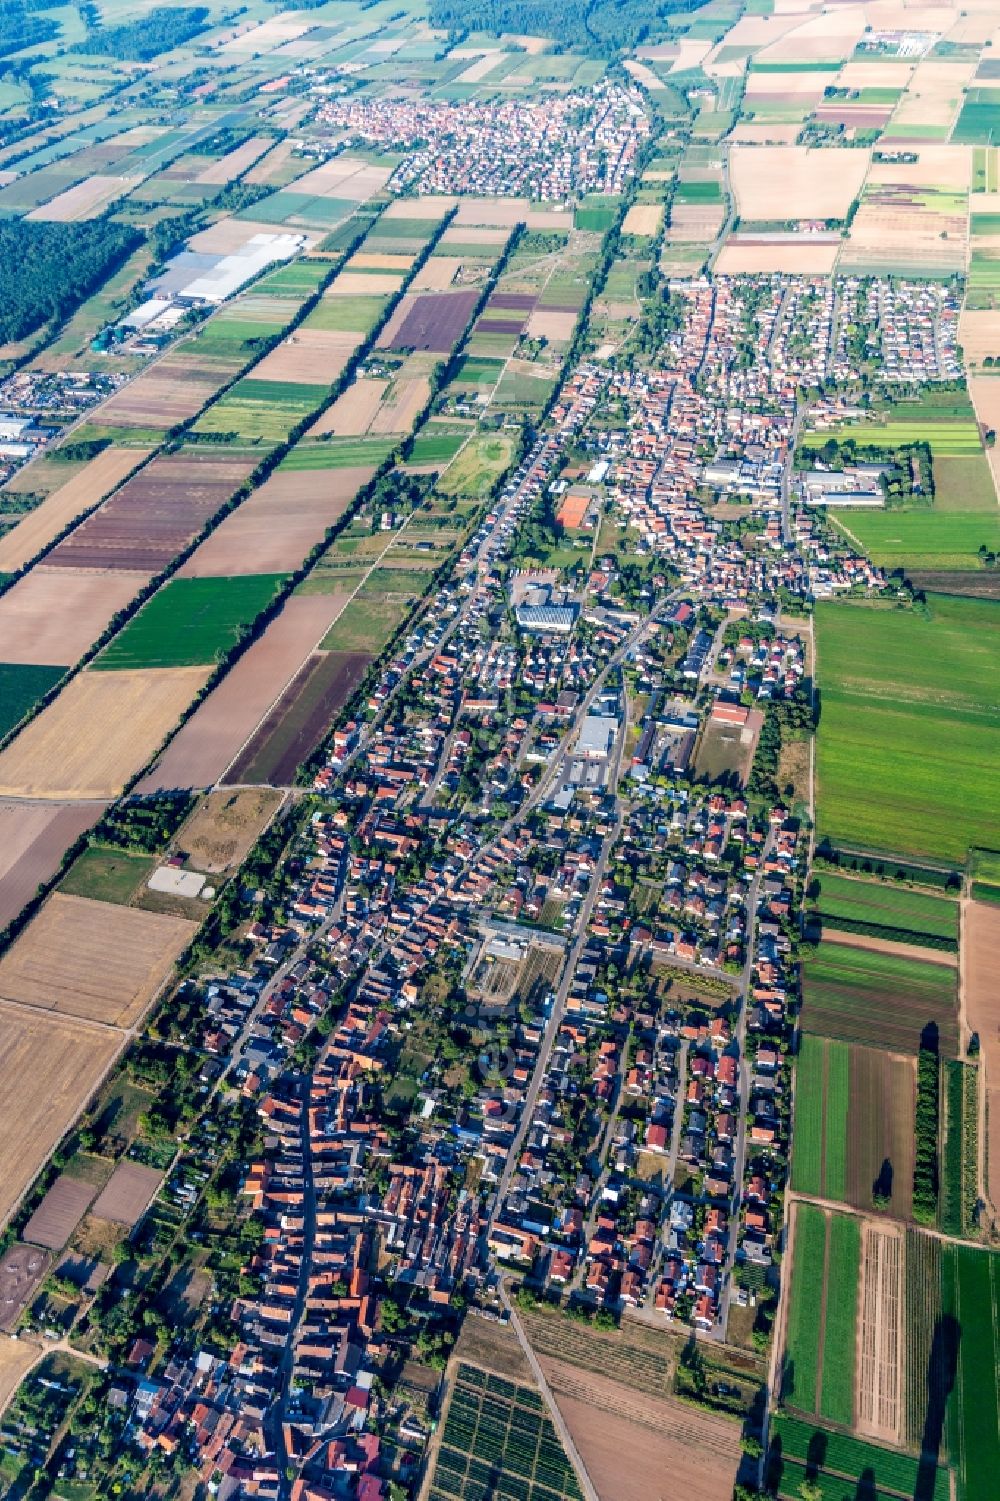 Aerial photograph Lustadt - Village view on the edge of agricultural fields and land in Lustadt in the state Rhineland-Palatinate, Germany